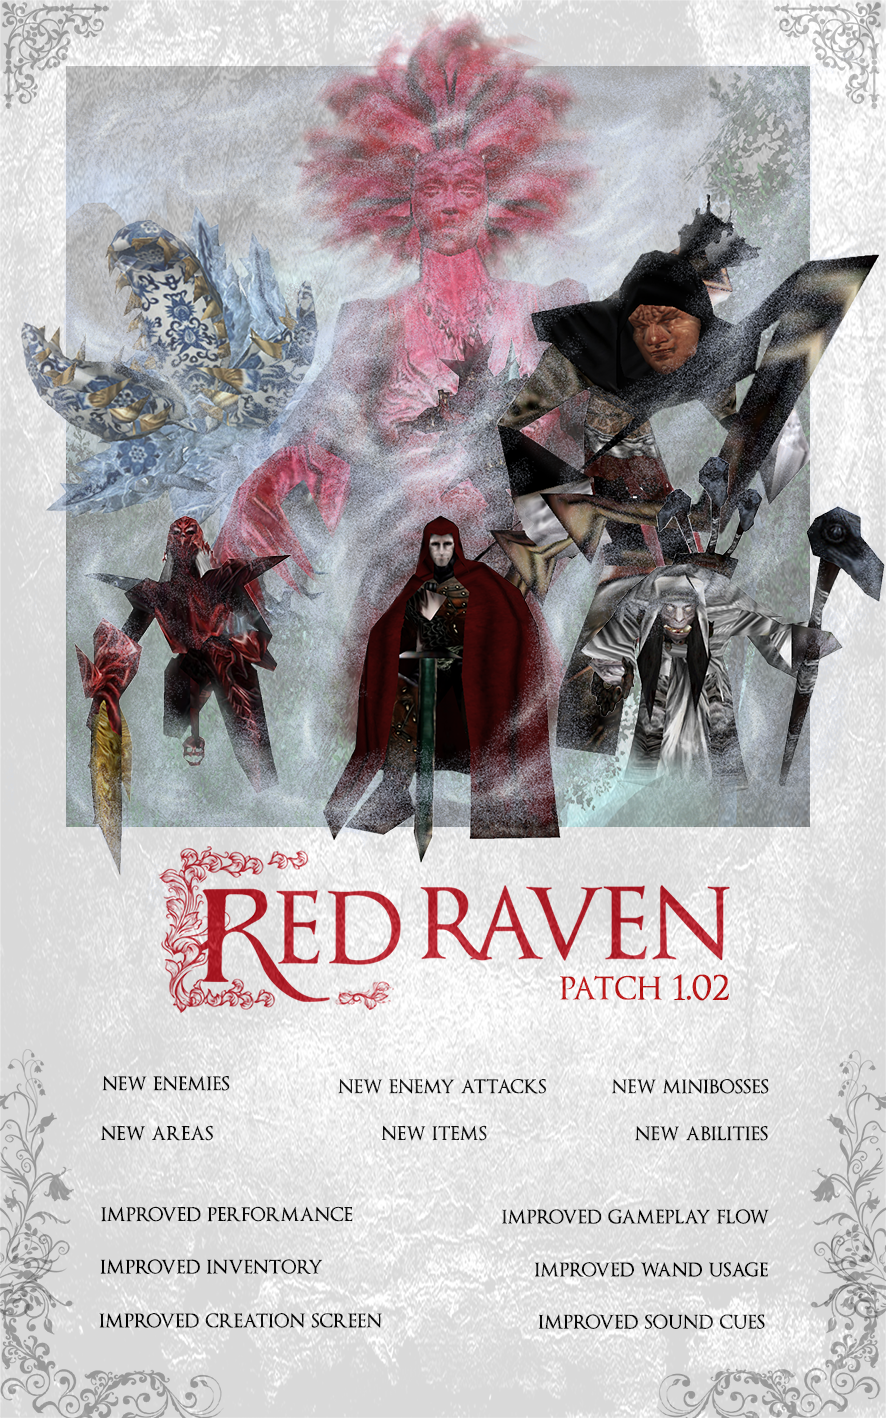 Red Raven - Patch 1.02